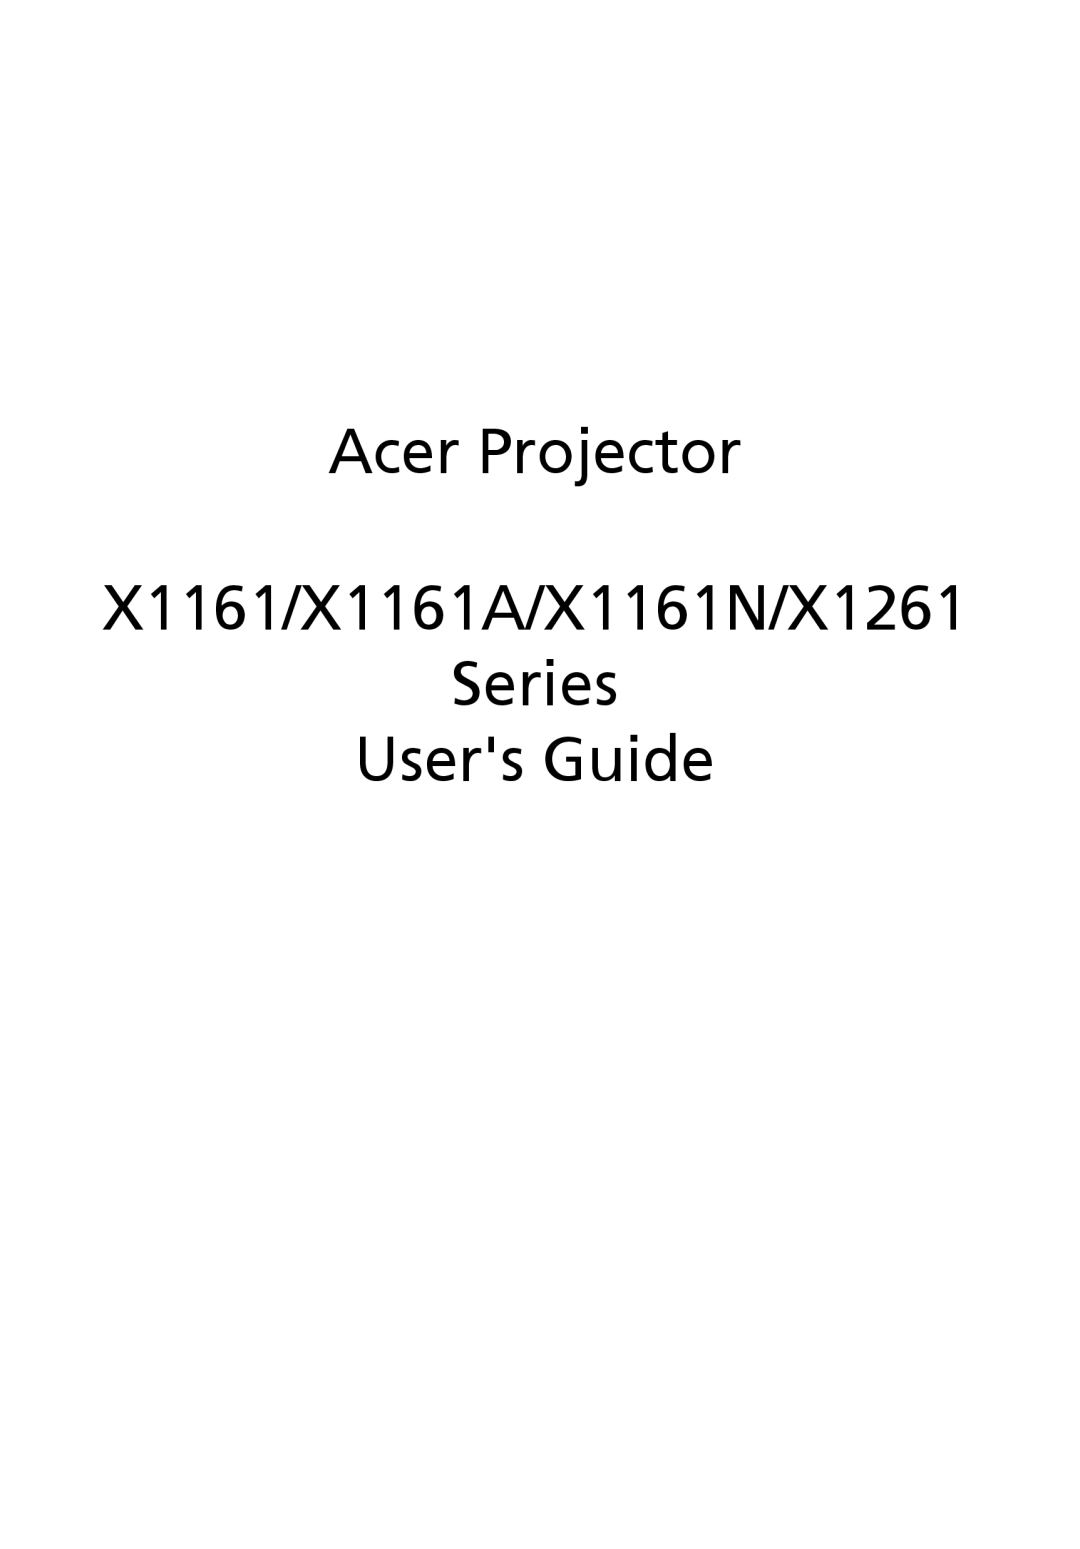 Acer manual Acer Projector X1161/X1161A/X1161N/X1261 Series Users Guide 